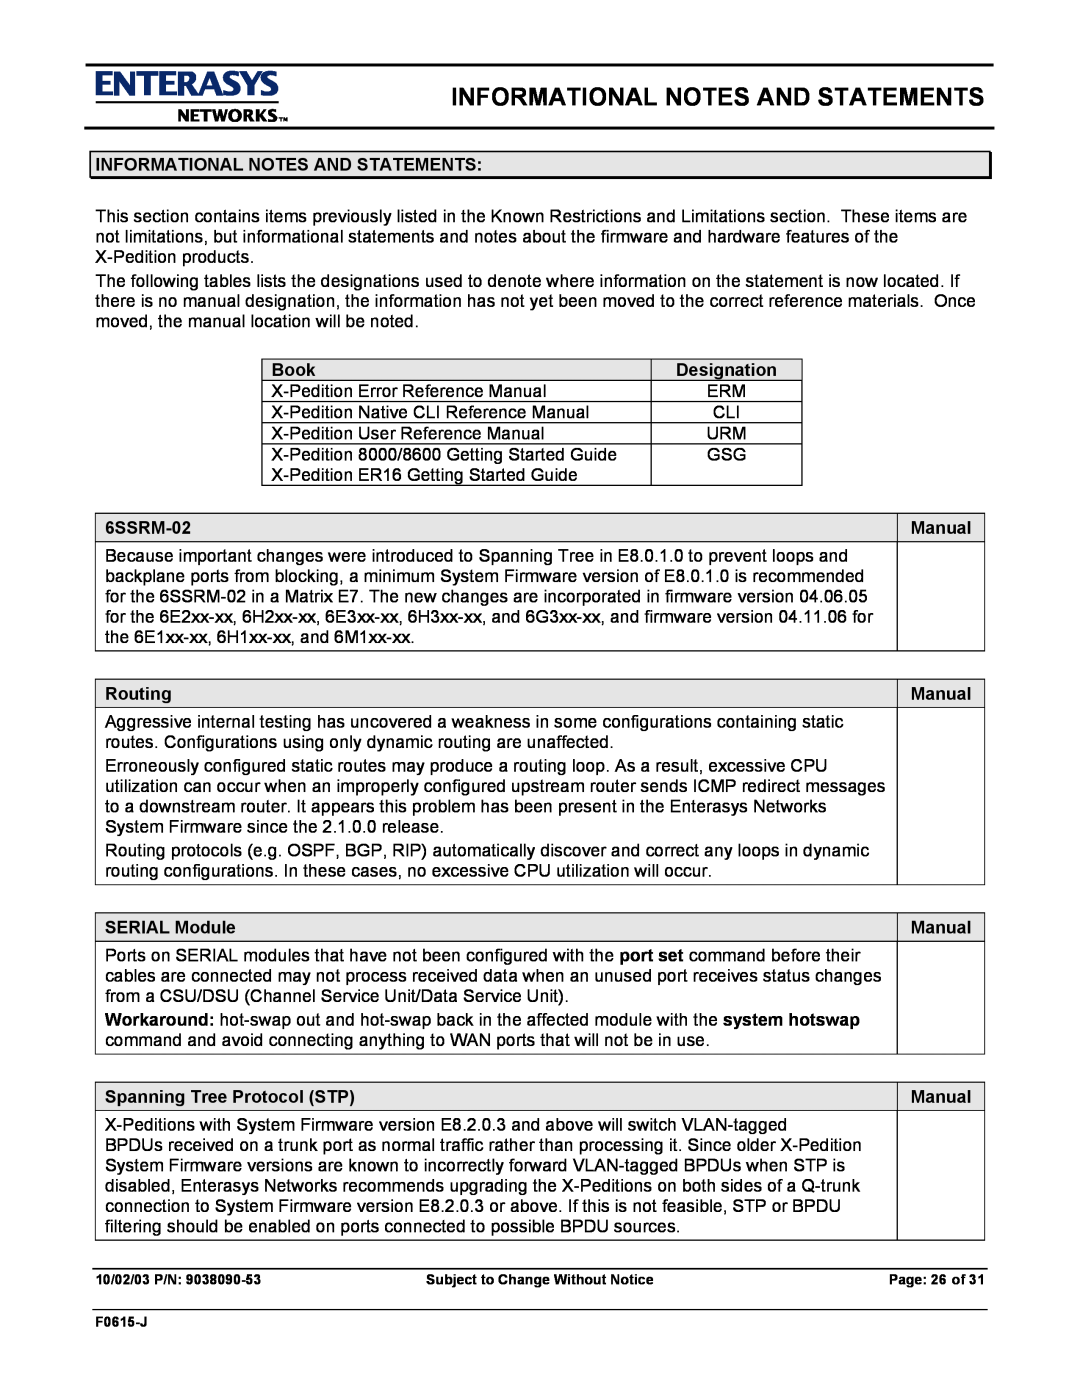 Enterasys Networks E9.1.7.0 manual Informational Notes And Statements 